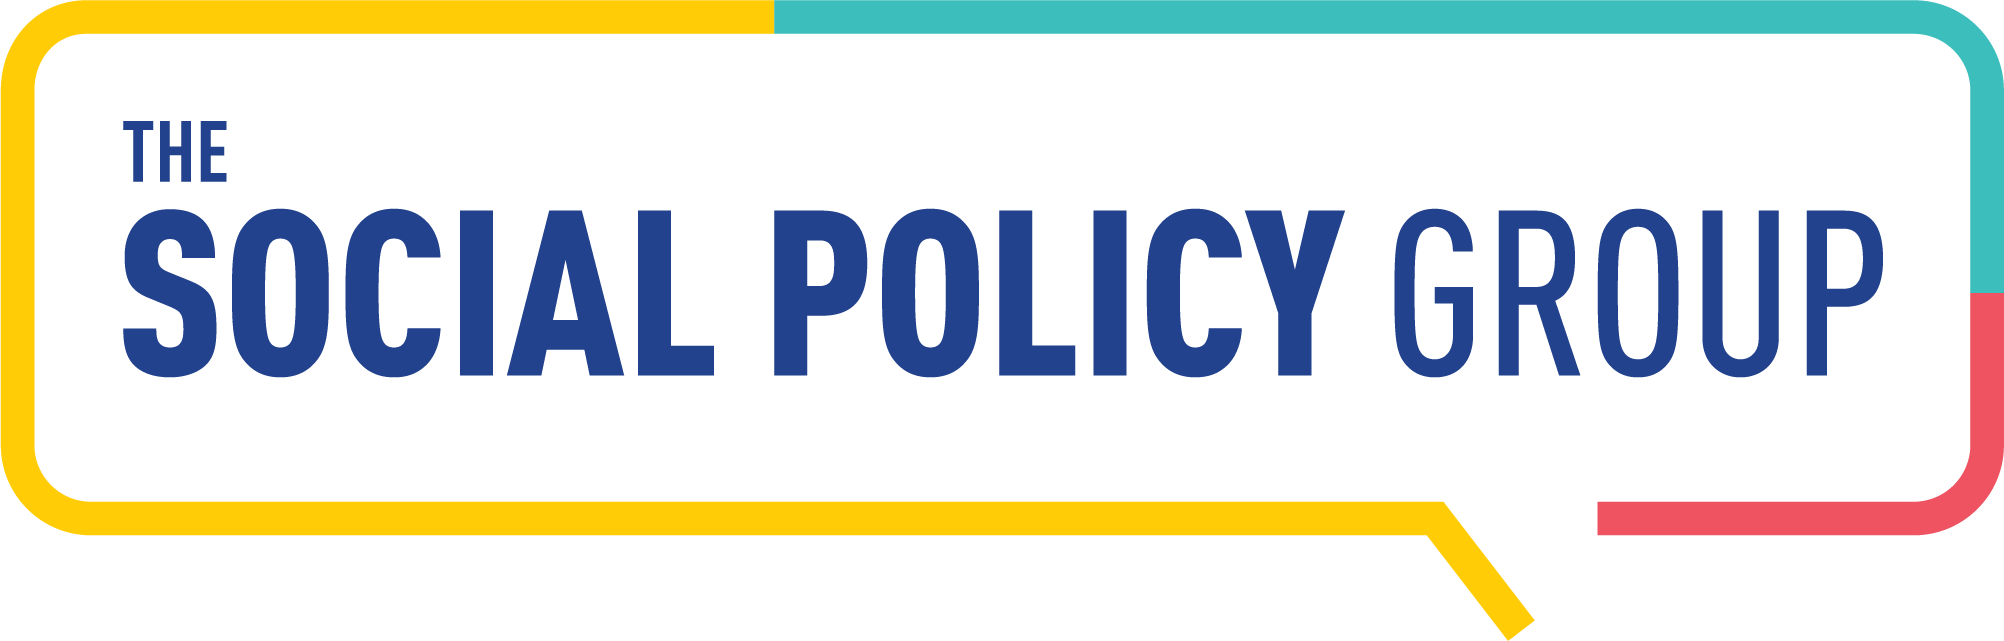 Intersectionality for Public Policy Leaders